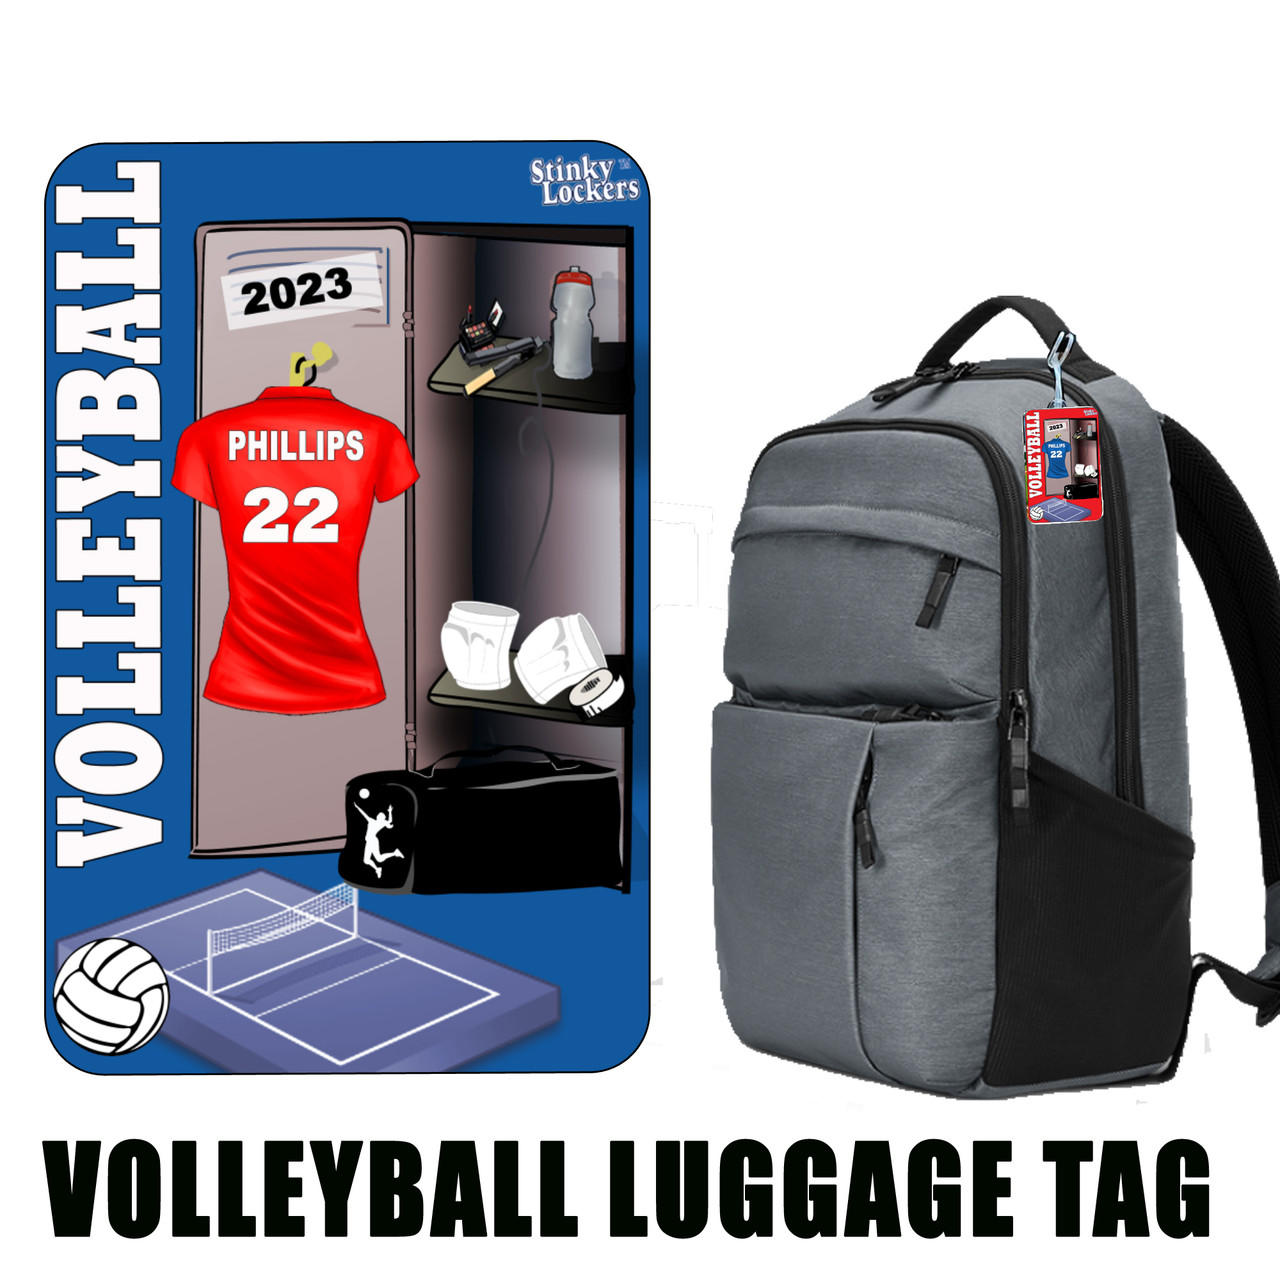 Personalized Female Volleyball Luggage Tag with Loop Questions & Answers